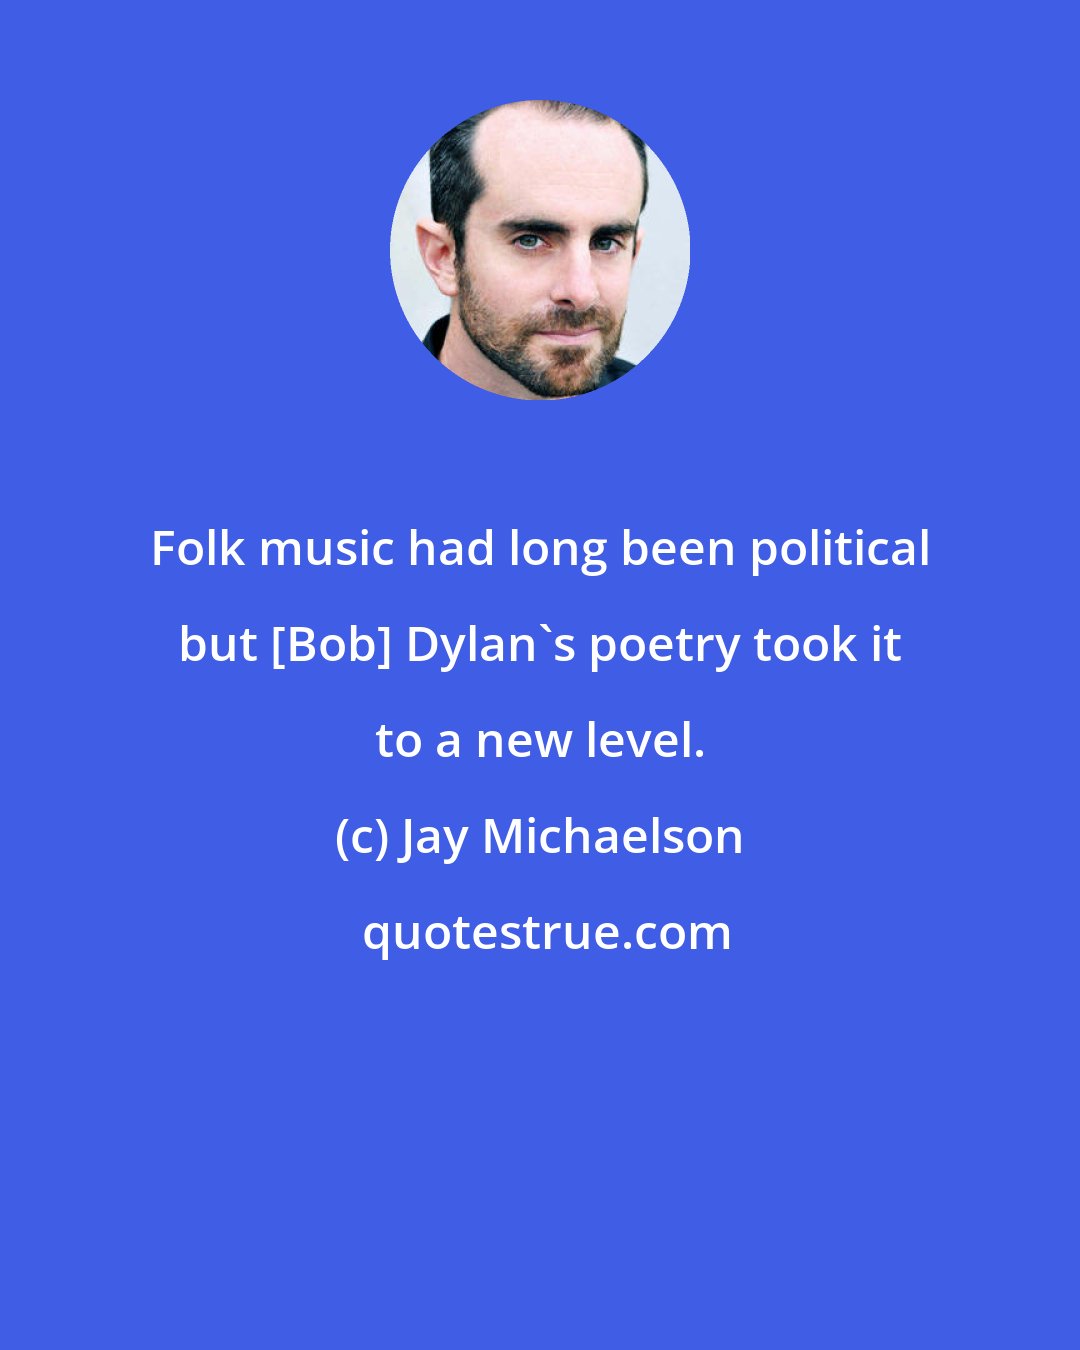 Jay Michaelson: Folk music had long been political but [Bob] Dylan's poetry took it to a new level.